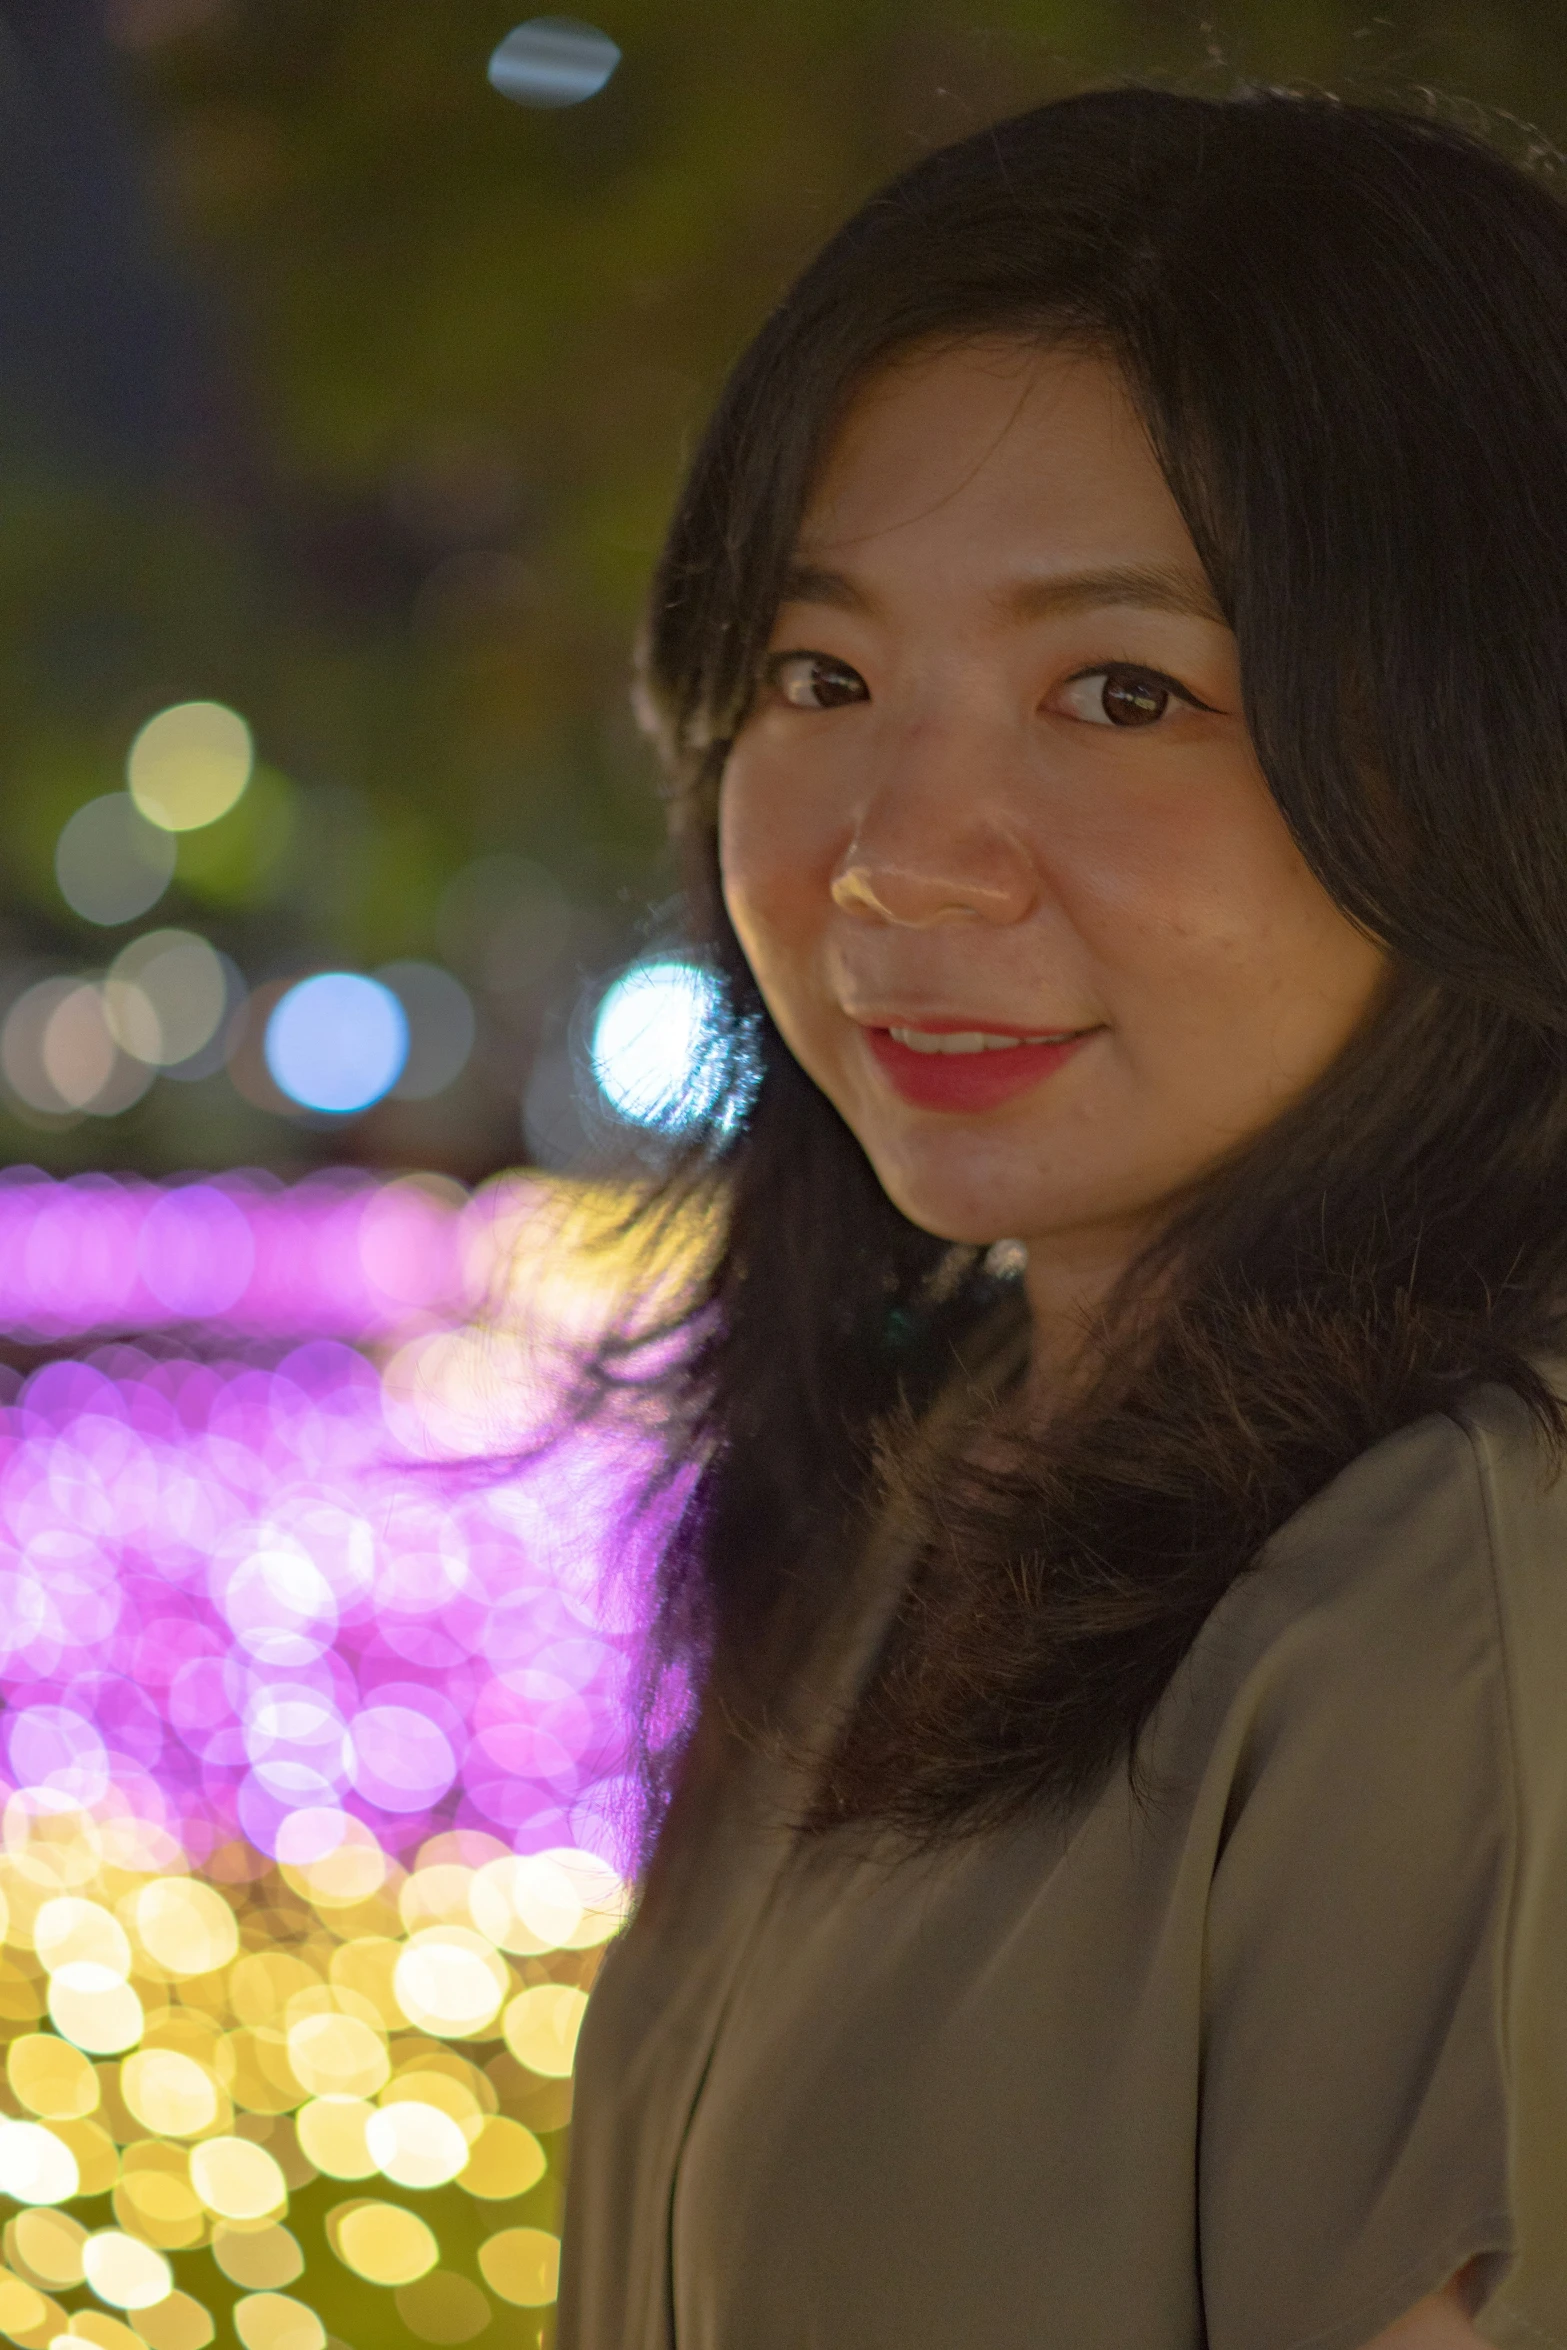 a woman poses in front of brightly lit lights